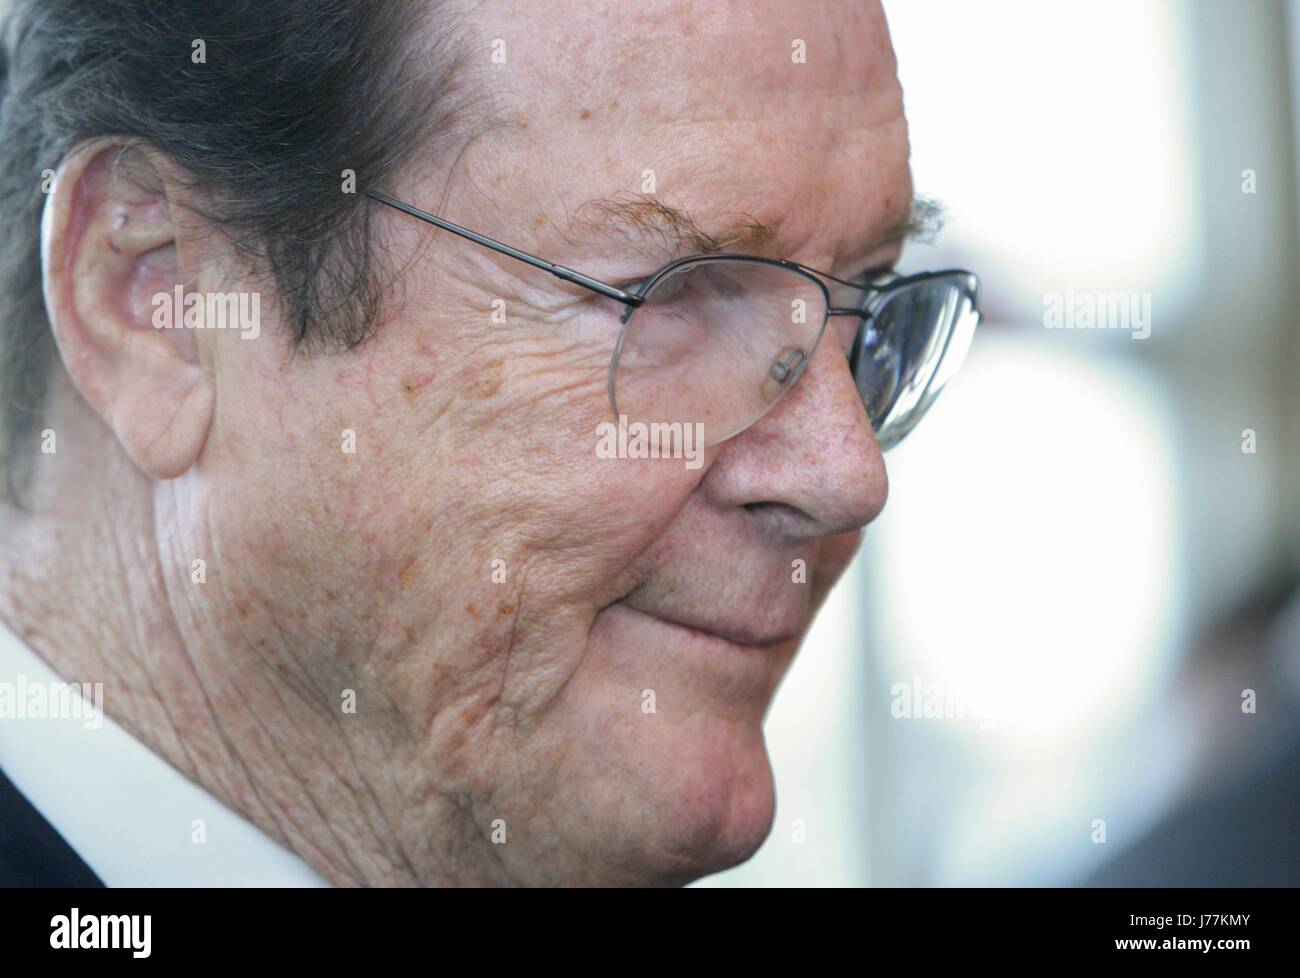 New York, United States Of America. 25th Oct, 2007. United Nations - New York - October 25 2007 - The annual Dag Hammarskjold luncheon honoring UNICEF Goodwill Ambassador and actor Roger Moore. It was the The 46th annual luncheon. Photo of: Sir Roger Moore.Credit: Luiz Rampelotto/Europa Newswire. | usage worldwide Credit: dpa/Alamy Live News Stock Photo